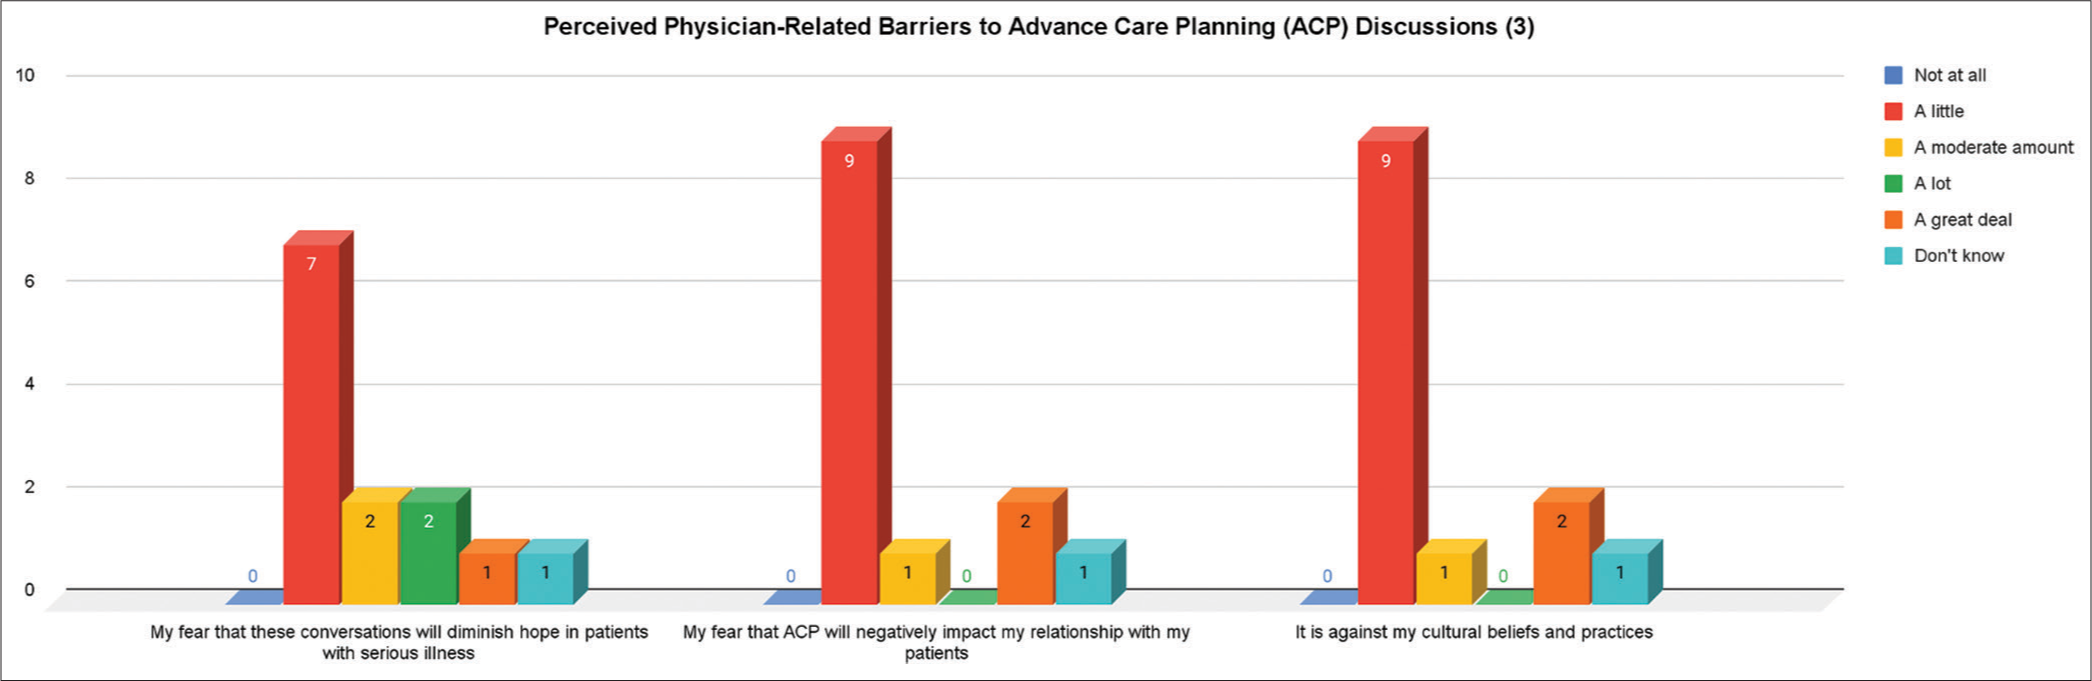 Perceived physician-related barriers to advance care planning (ACP) discussions (3) Third set of items for perceived physician-related barriers.